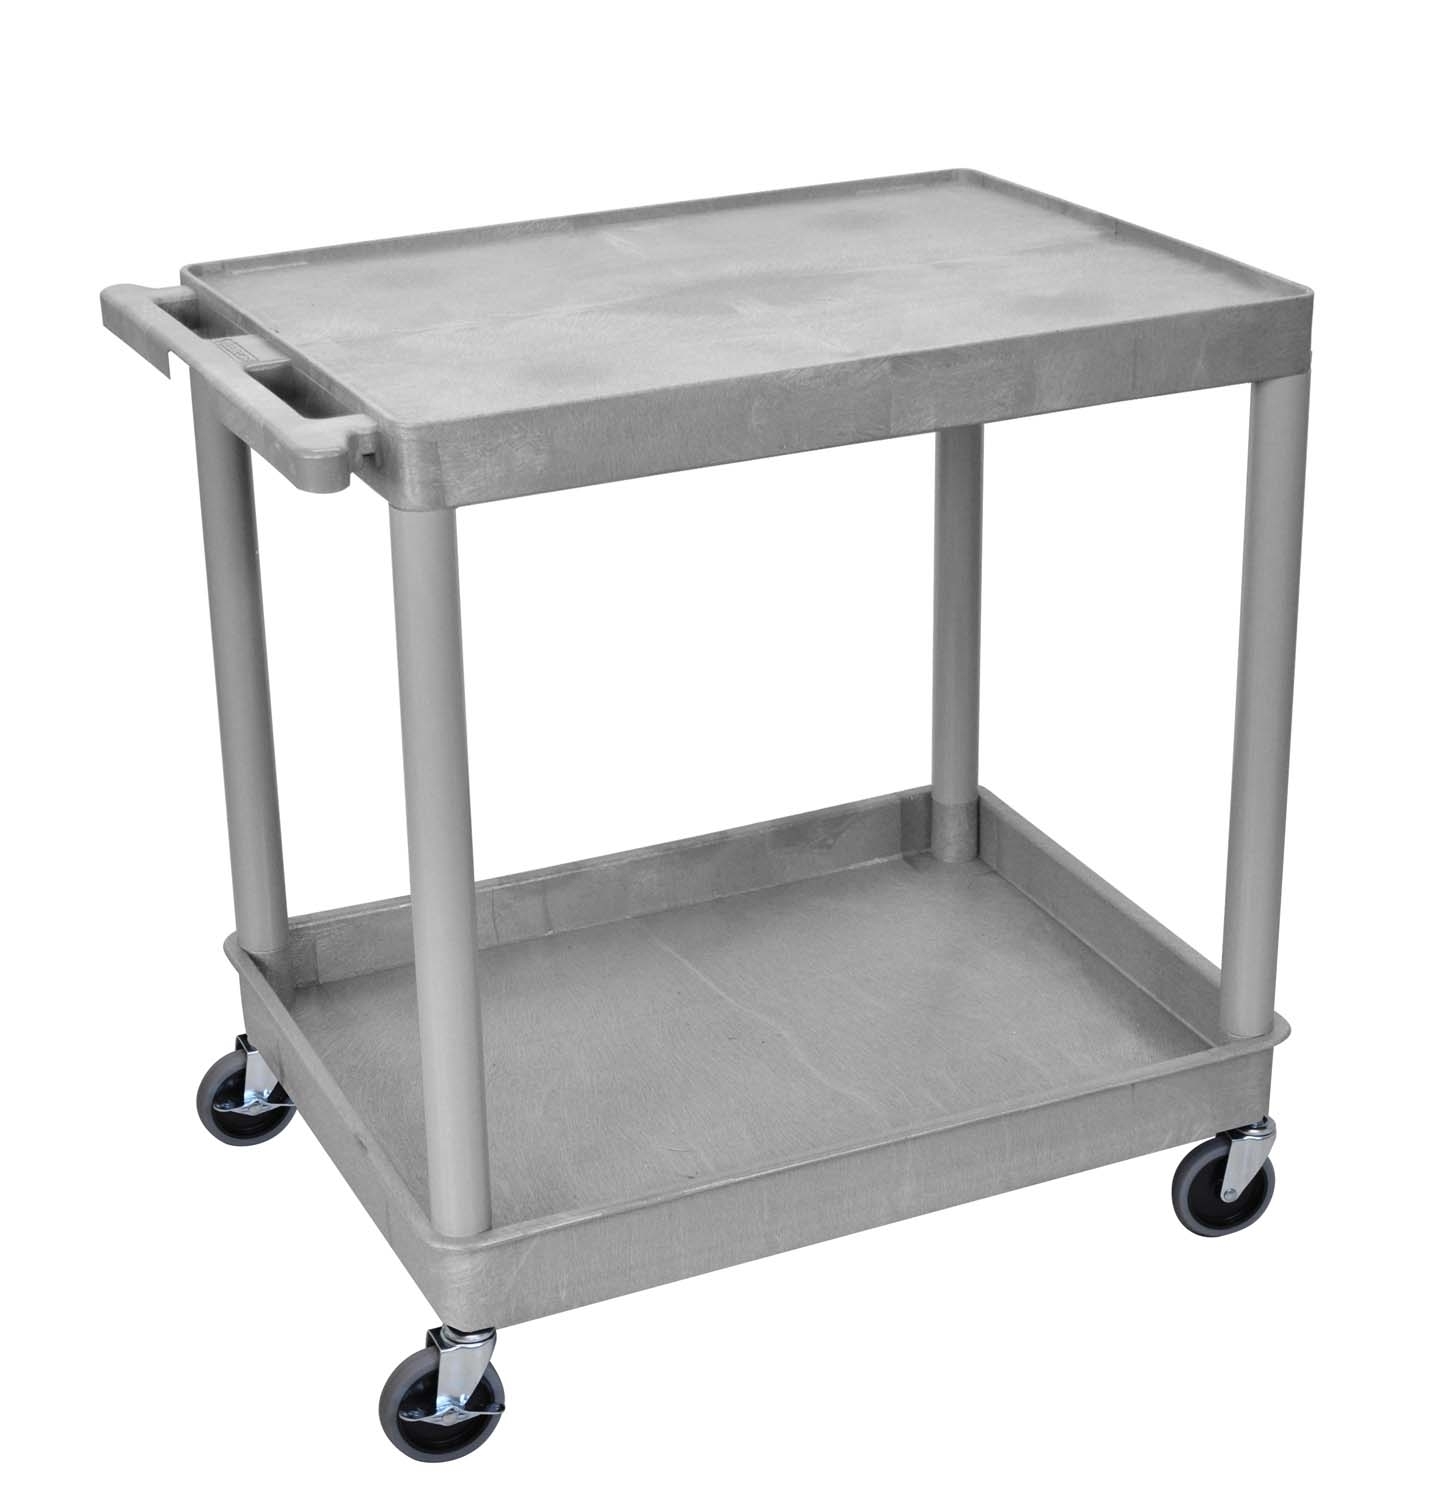 Offex Of-tc21-g - Large Flat Top And Tub Bottom Shelf Cart - Gray